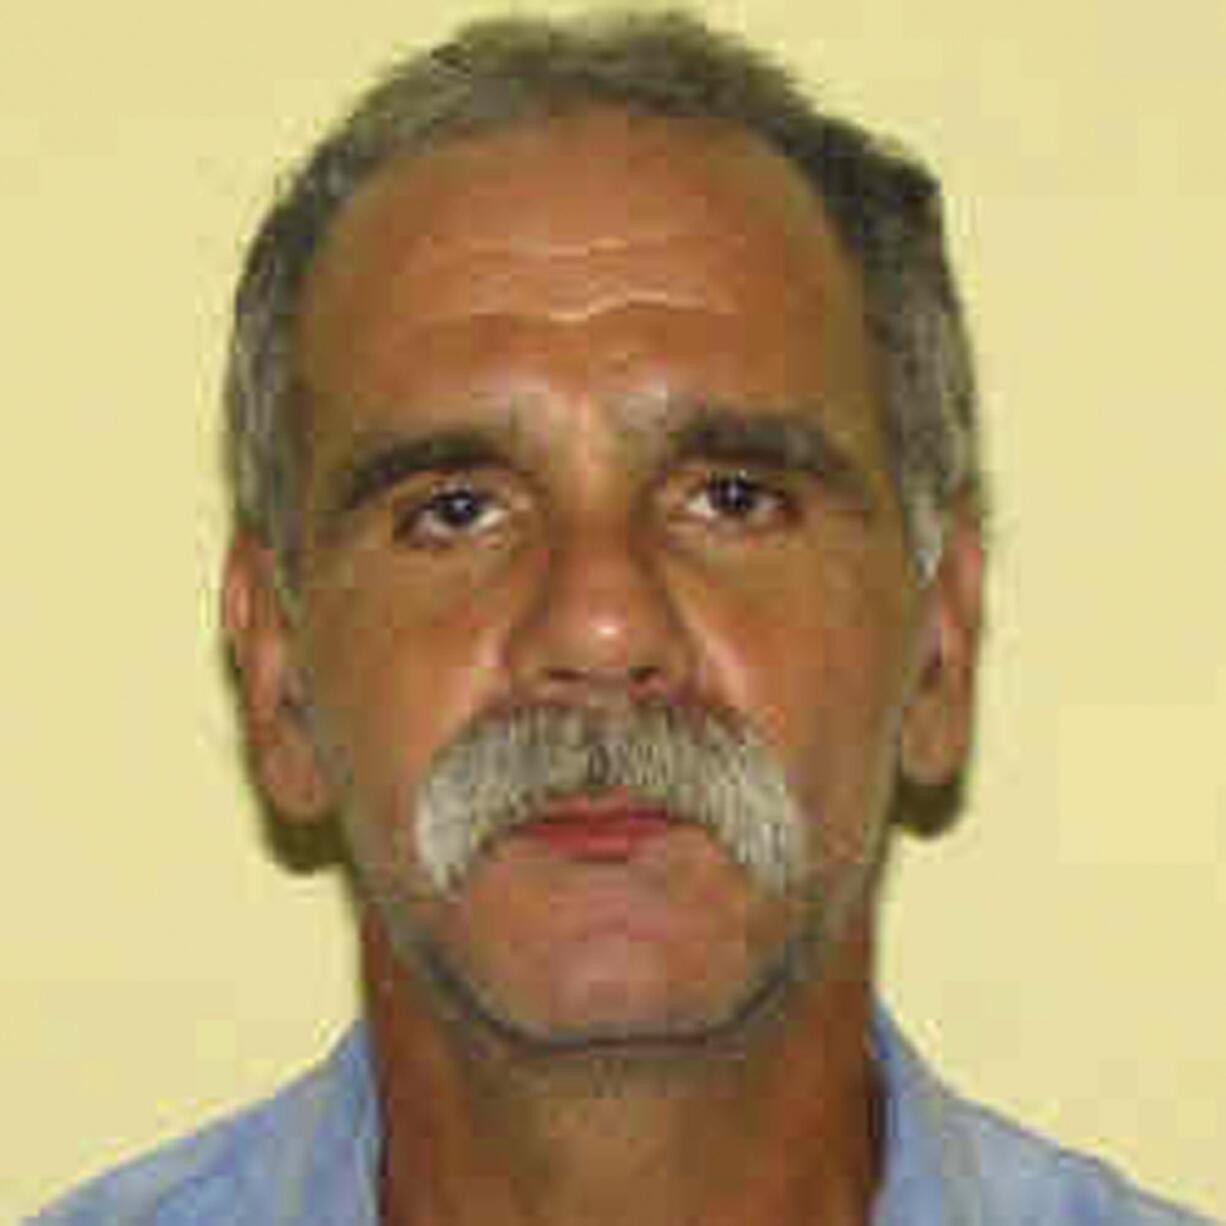 This undated photo shows provided by the Ohio Department of Rehabilitation and Corrections shows John Modie. The Ohio Department of Rehabilitation and Correction on Monday, March 28, 2016, confirmed the possible escape of Modie, convicted of killing a woman in Cleveland, from the Hocking Unit of the Southeastern Correctional Complex in Nelsonville. The department says Modie was found to be missing during the 11:00 p.m. count of inmates Sunday night.